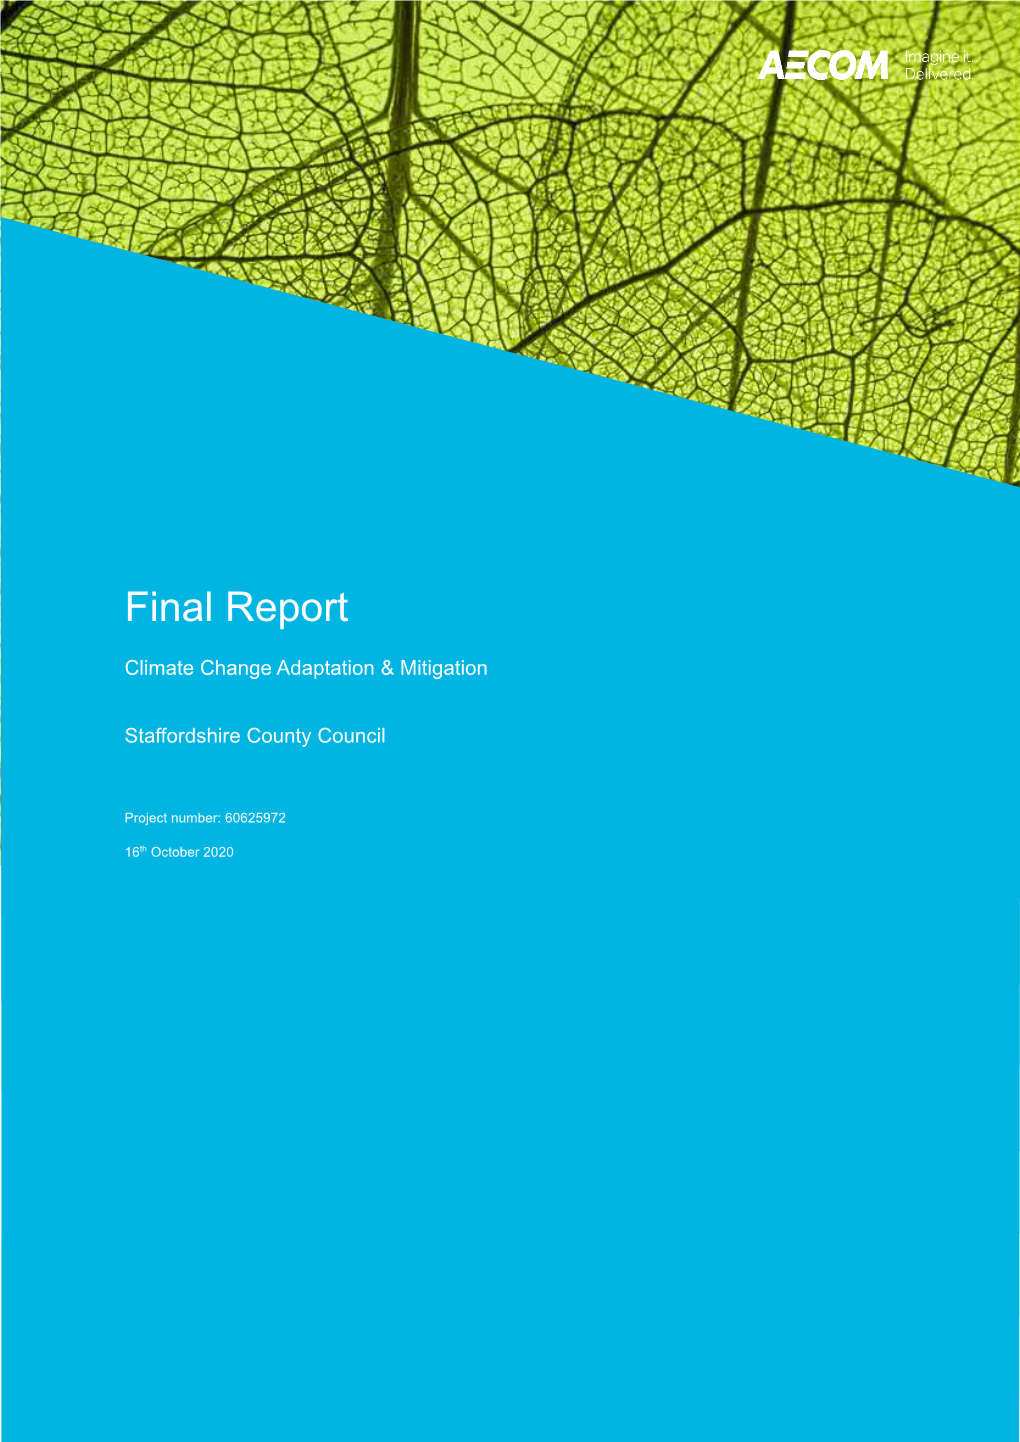 Climate Change Adaptation and Mitigation Final Report